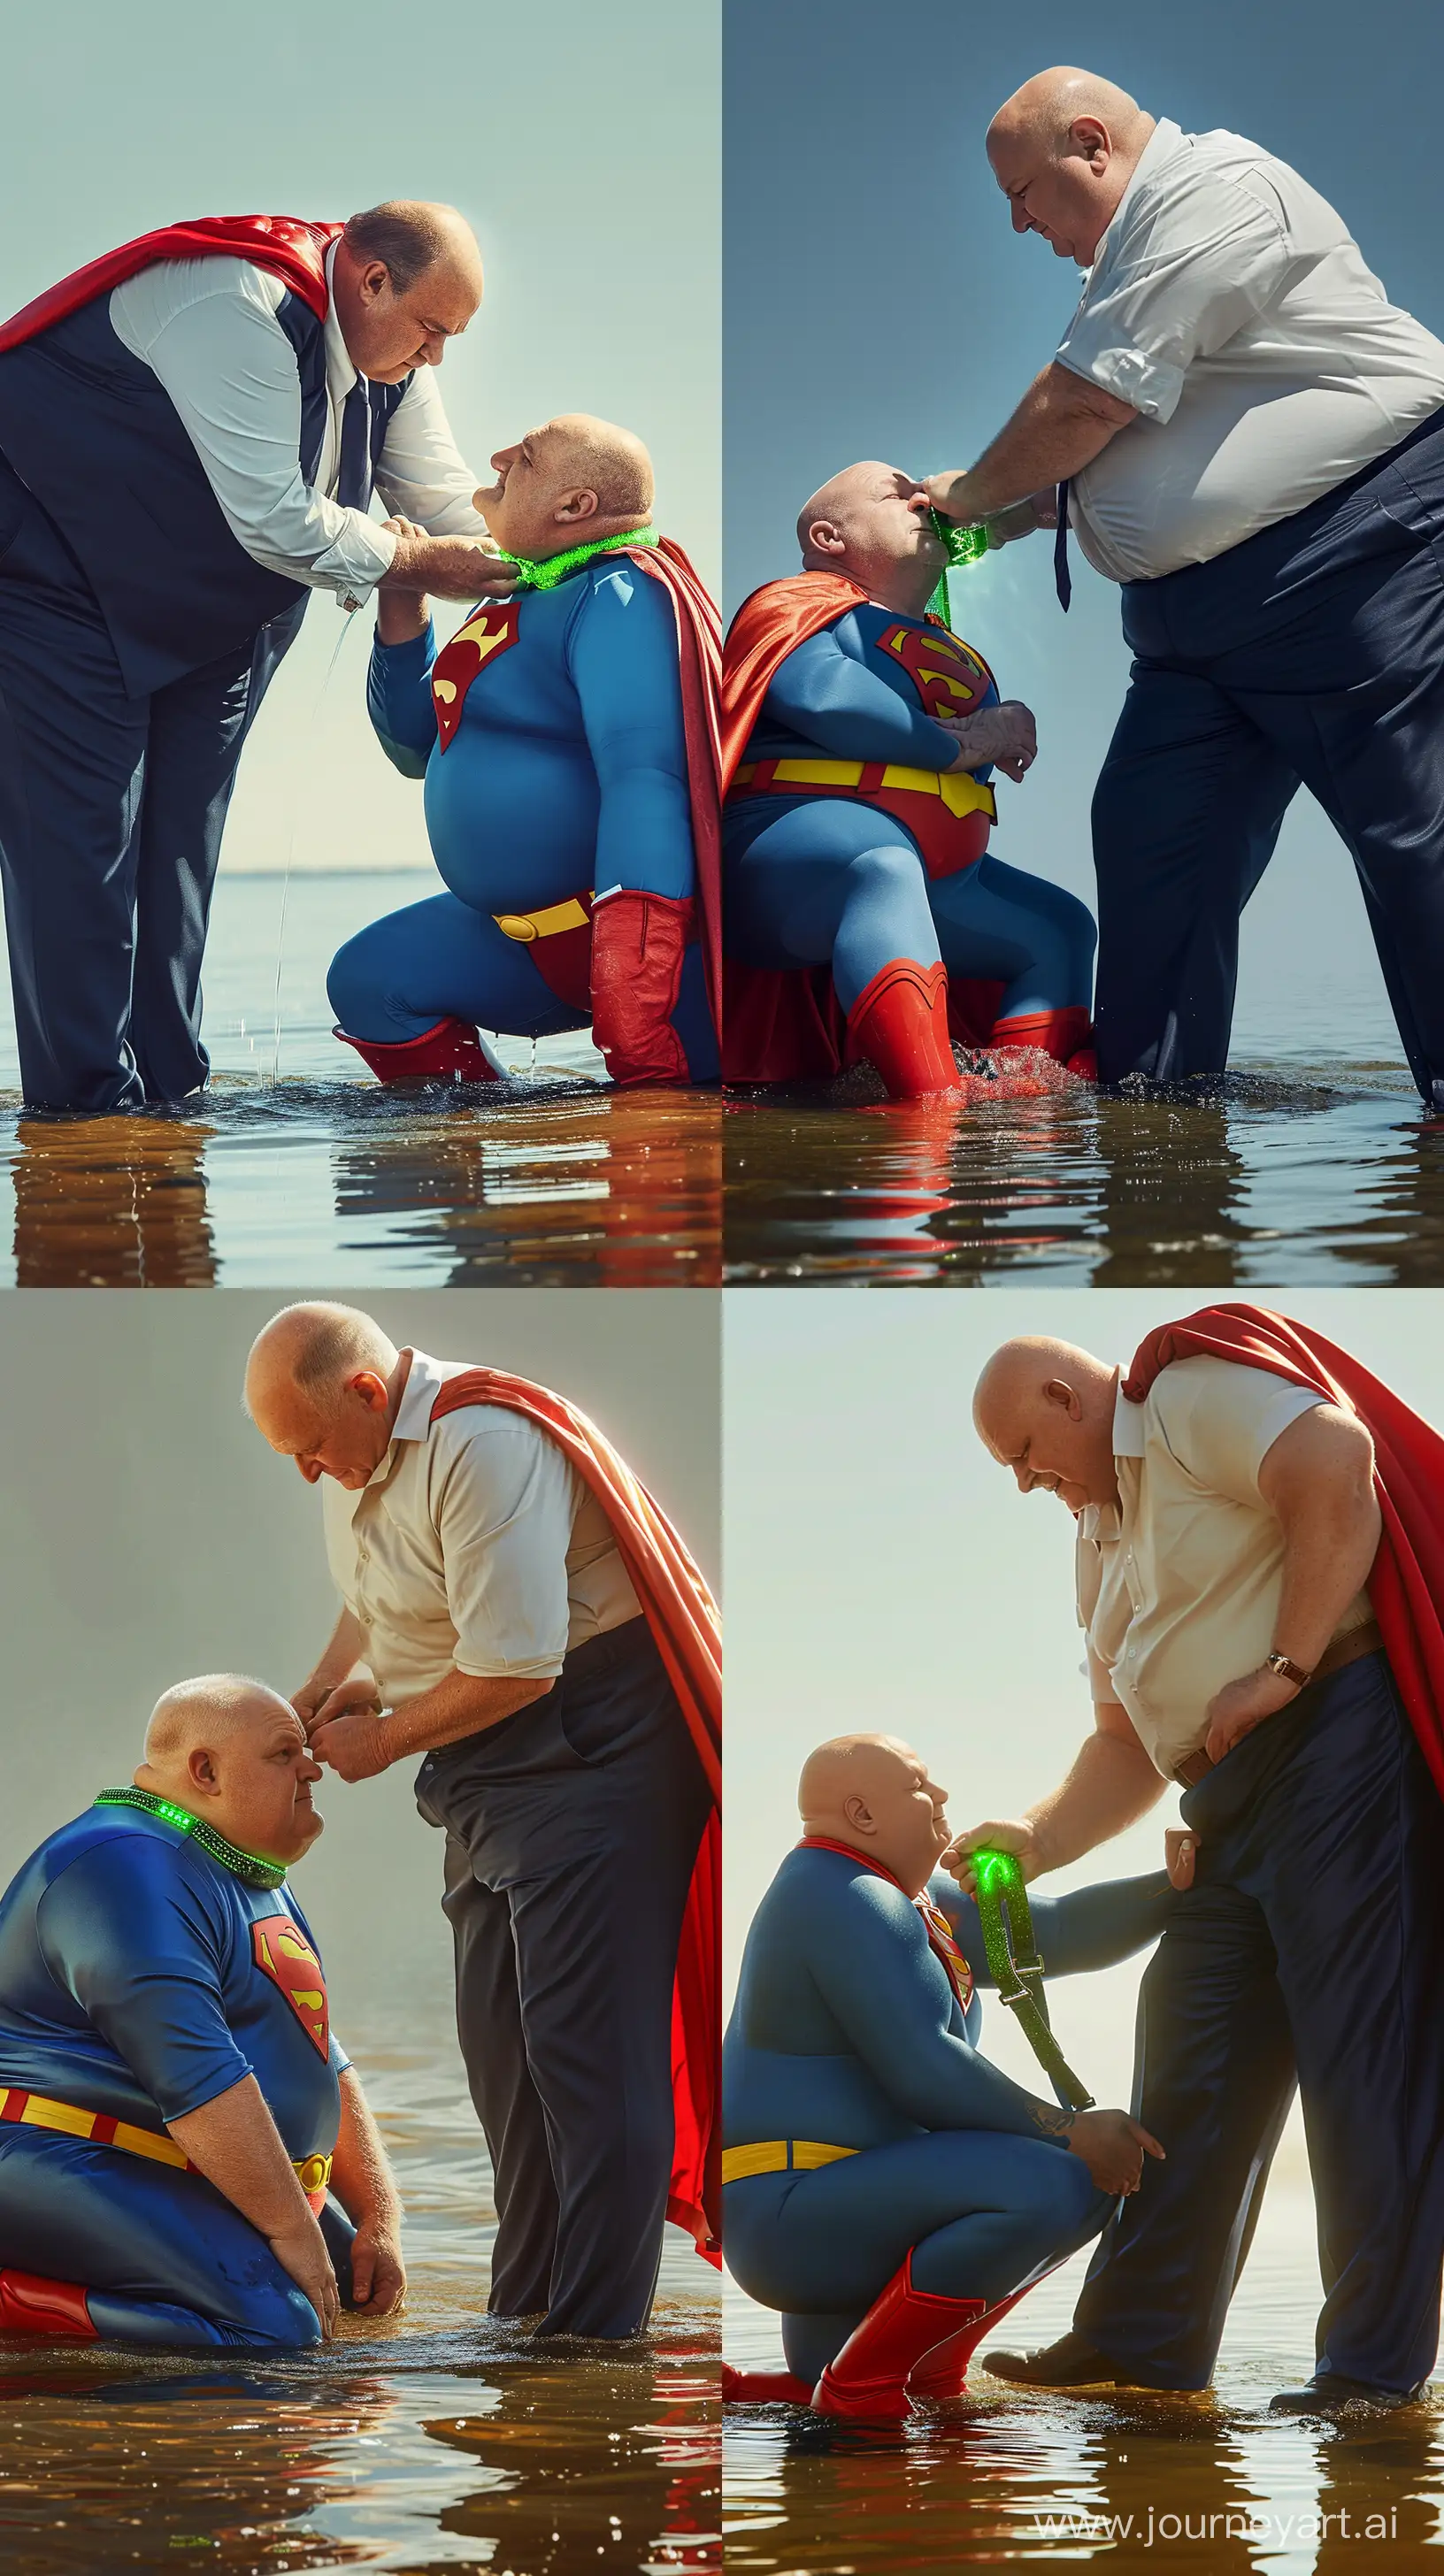 Elderly-Duos-Playful-Water-Scene-Fashion-Collars-and-Superman-Costumes